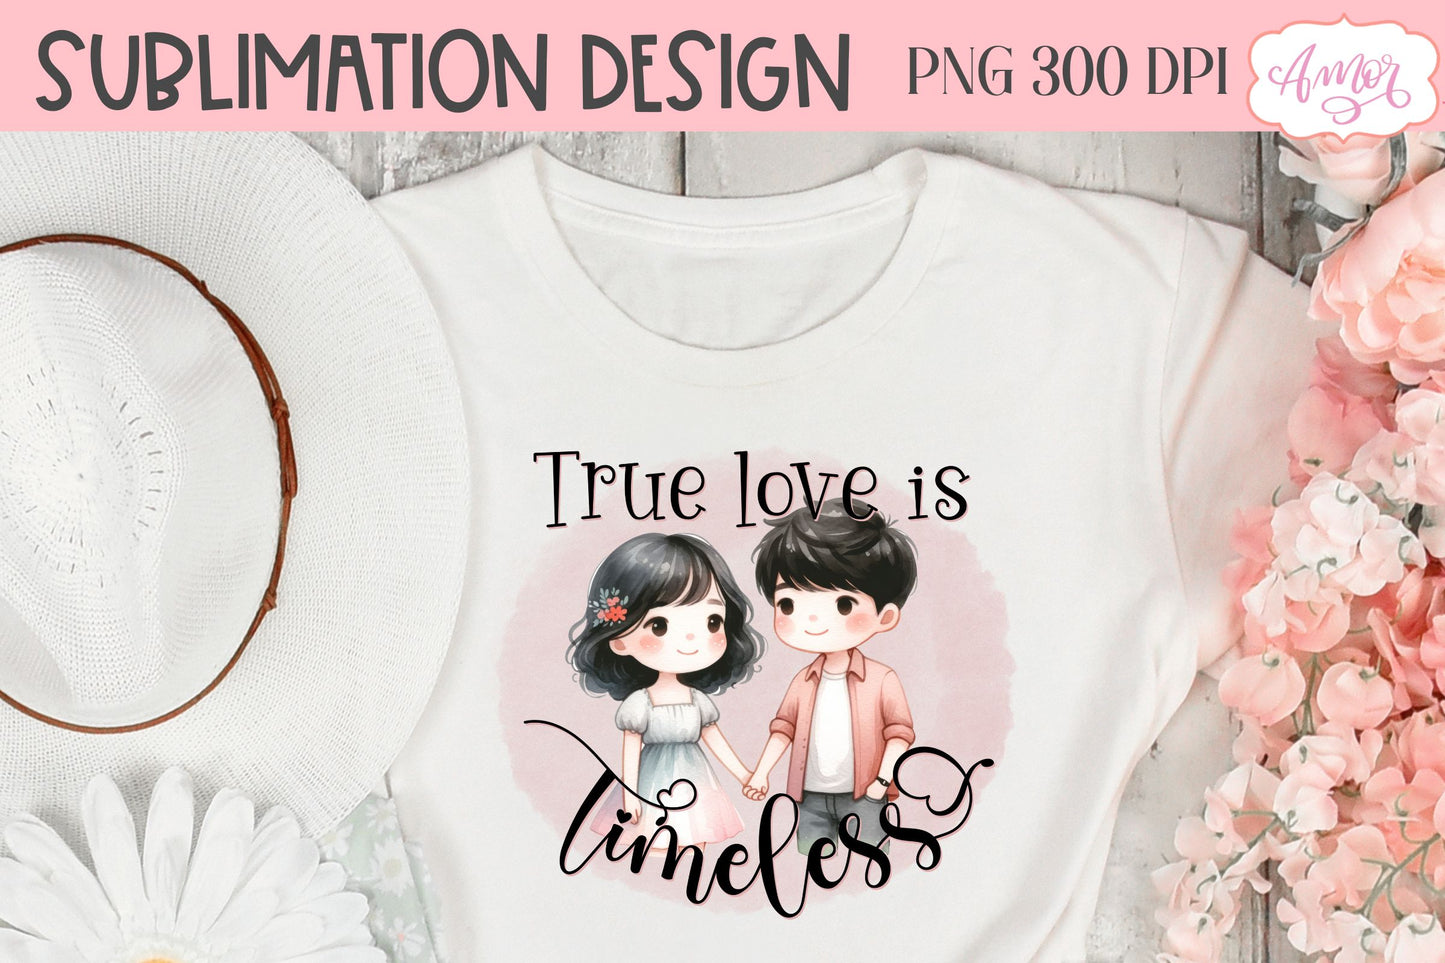 True love is timeless PNG design for Valentine's Day